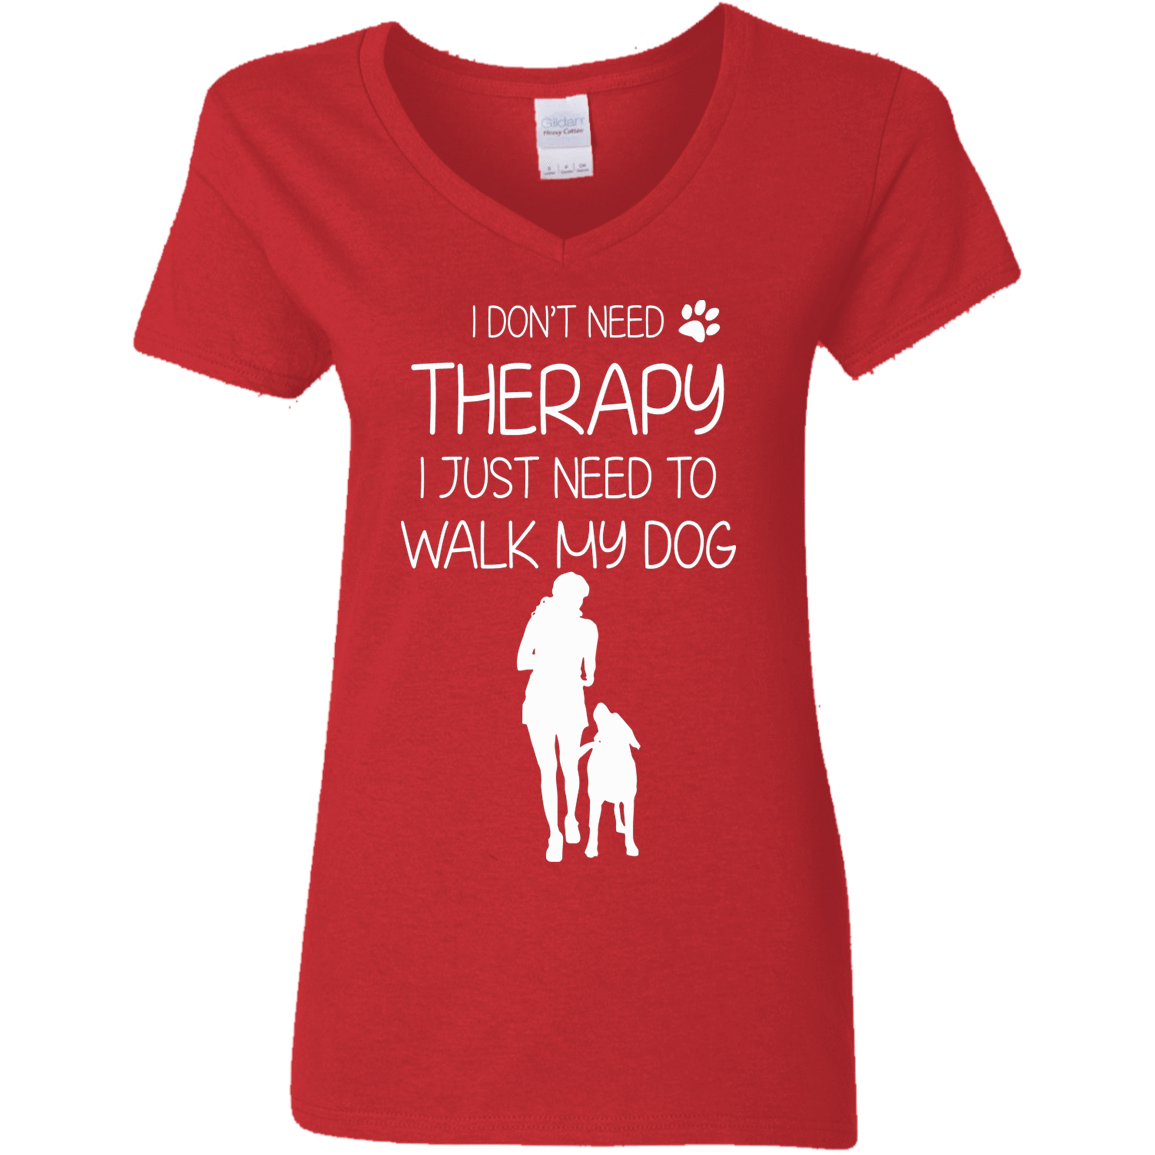 I Don't Need Therapy - Ladies V Neck.